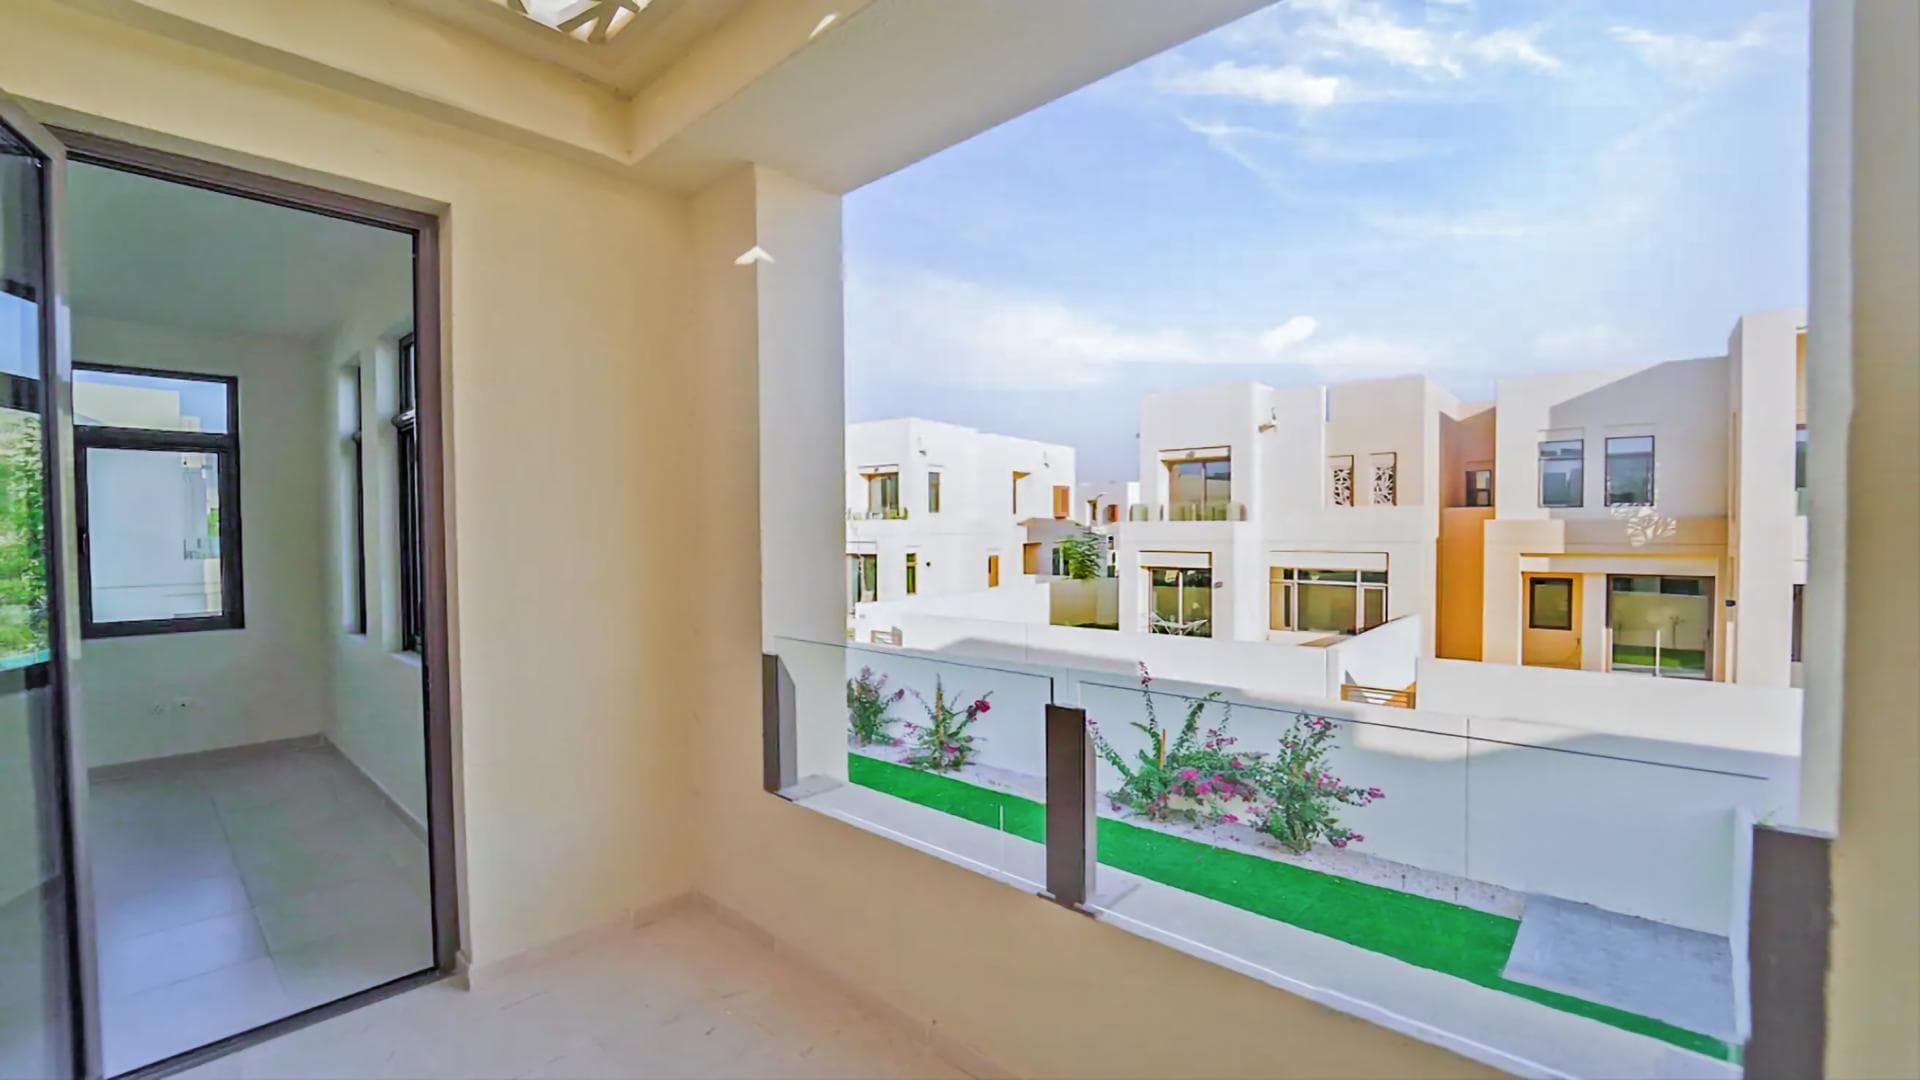 3 Bedroom Townhouse For Sale Mira Oasis Lp28083 251d87a2dd680000.jpg